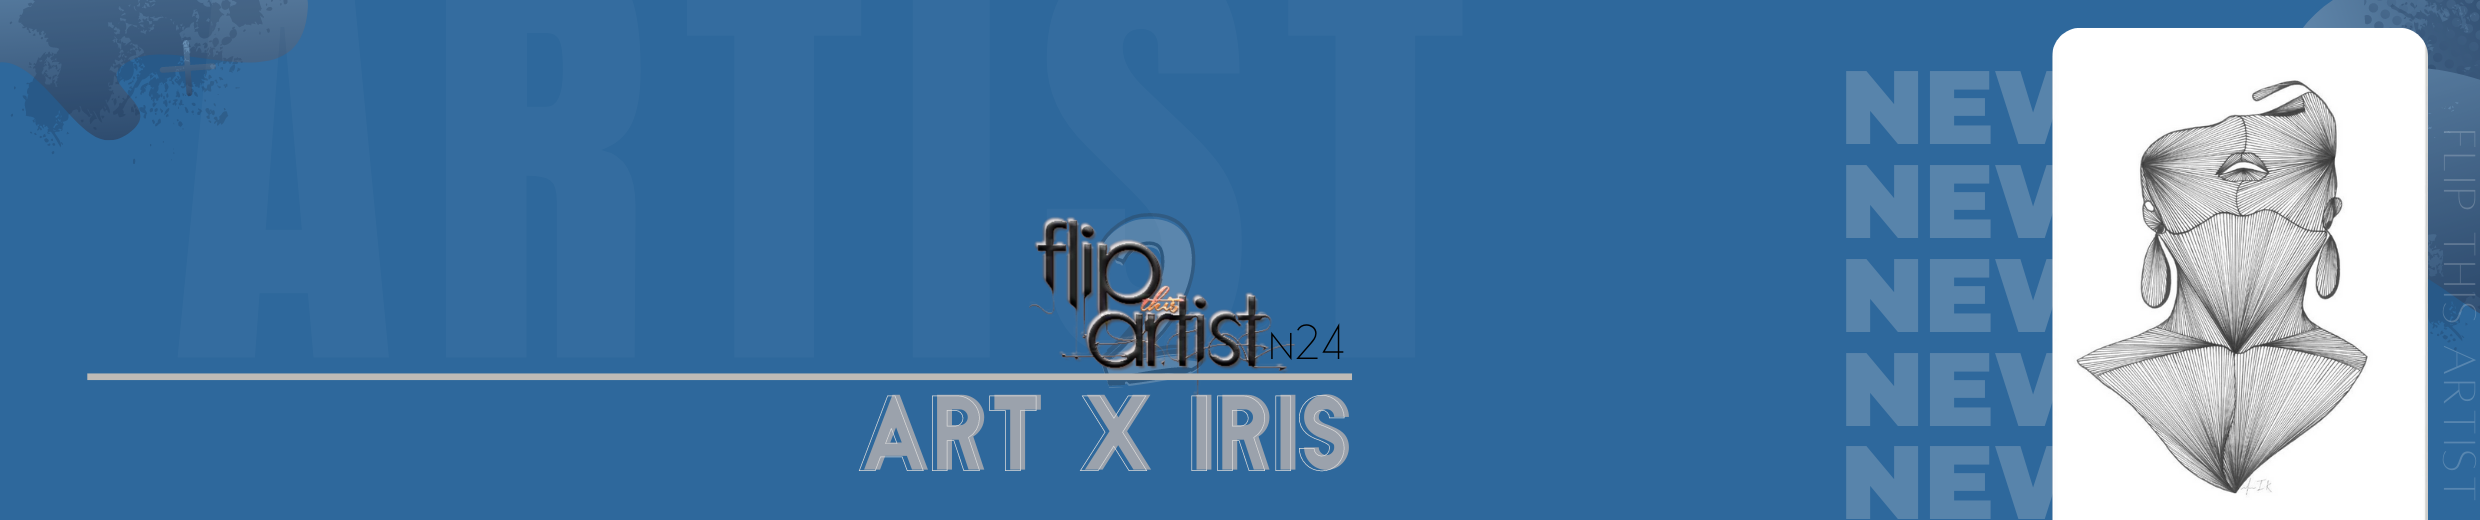 0_1628750584588_Copy of Copy of FLIP THIS ARTist banner for tk page.png